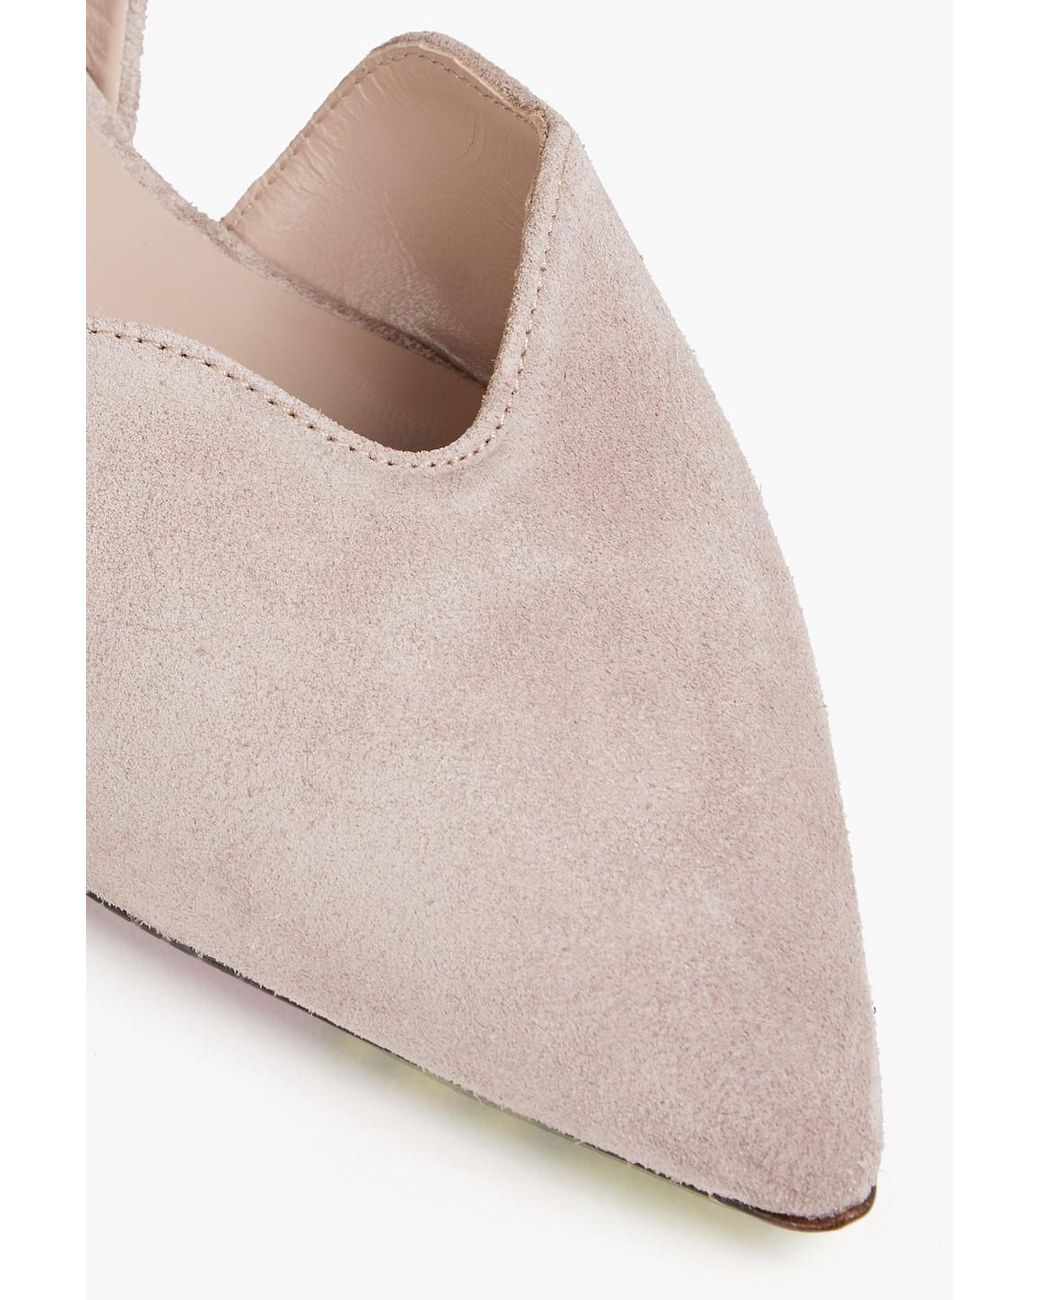 Paul Smith Viola Suede Slingback Flats in Pink | Lyst